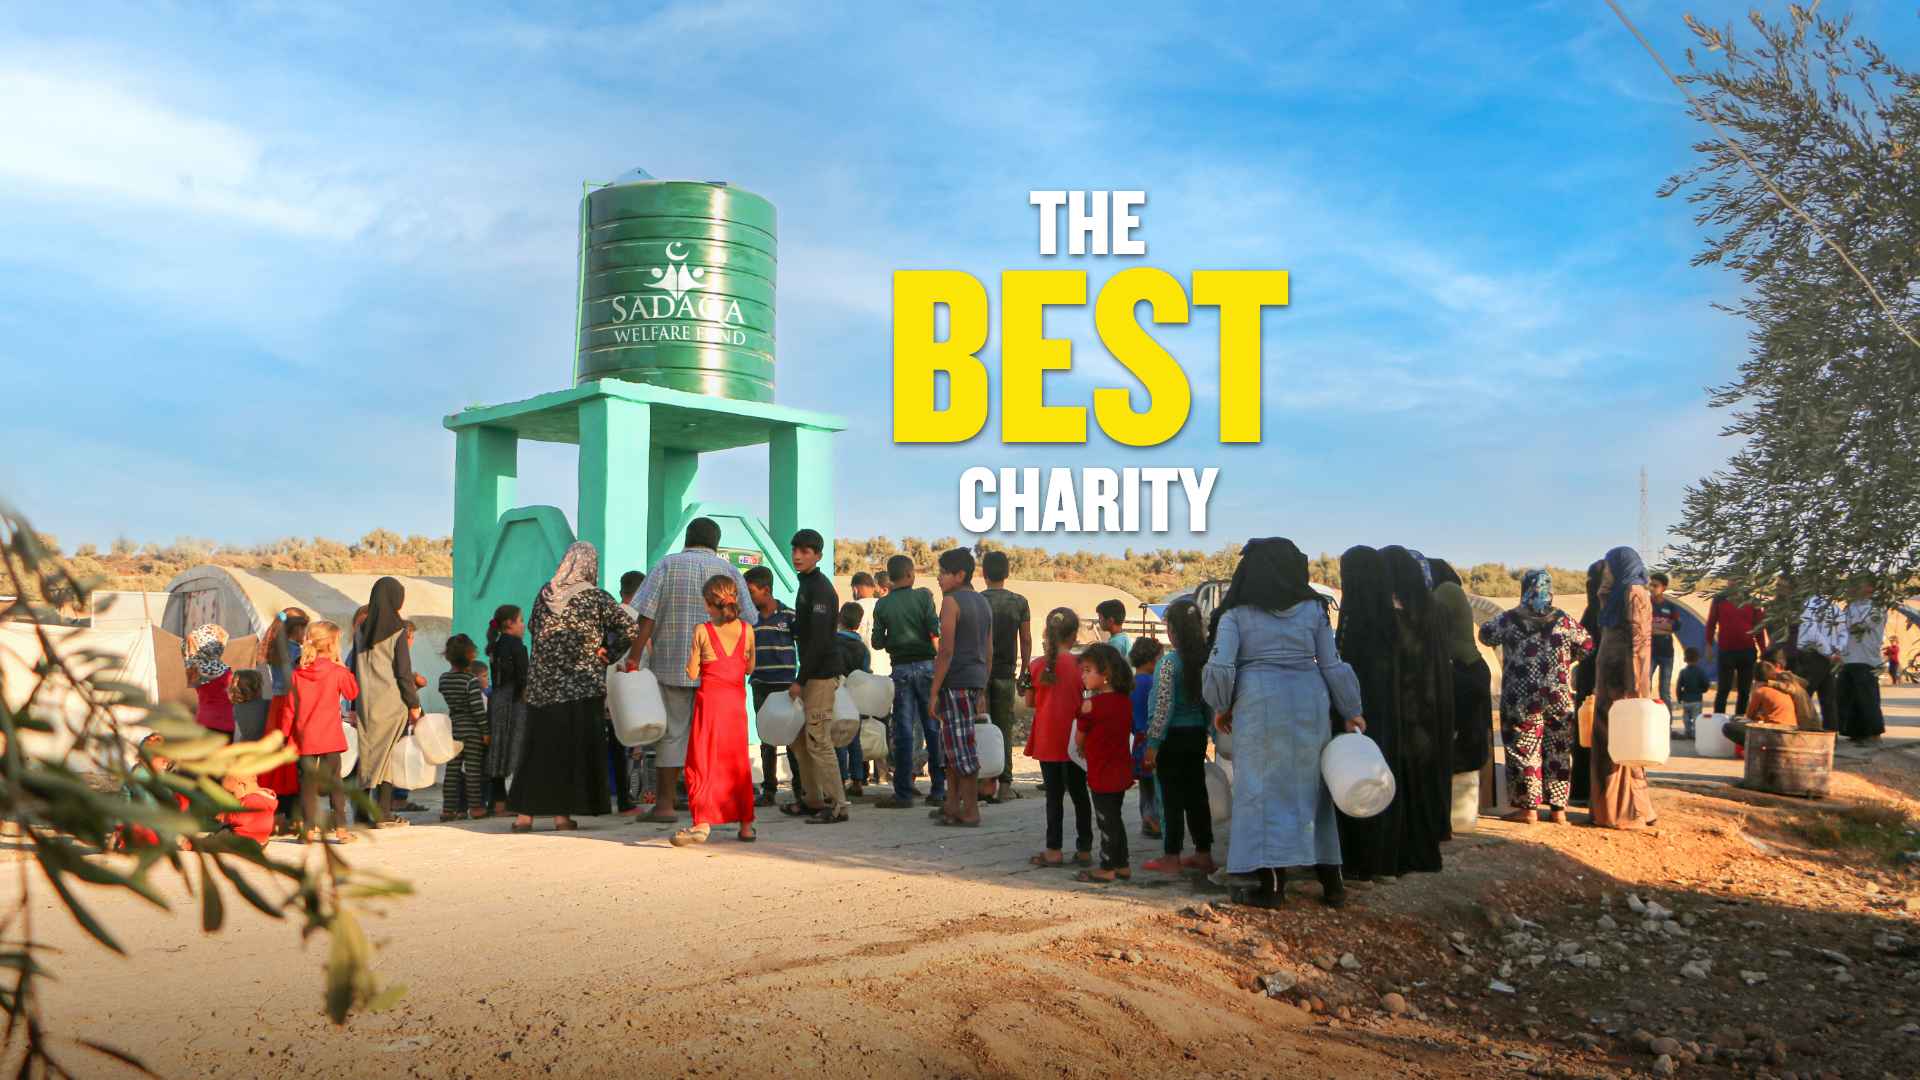 The BEST Charity?